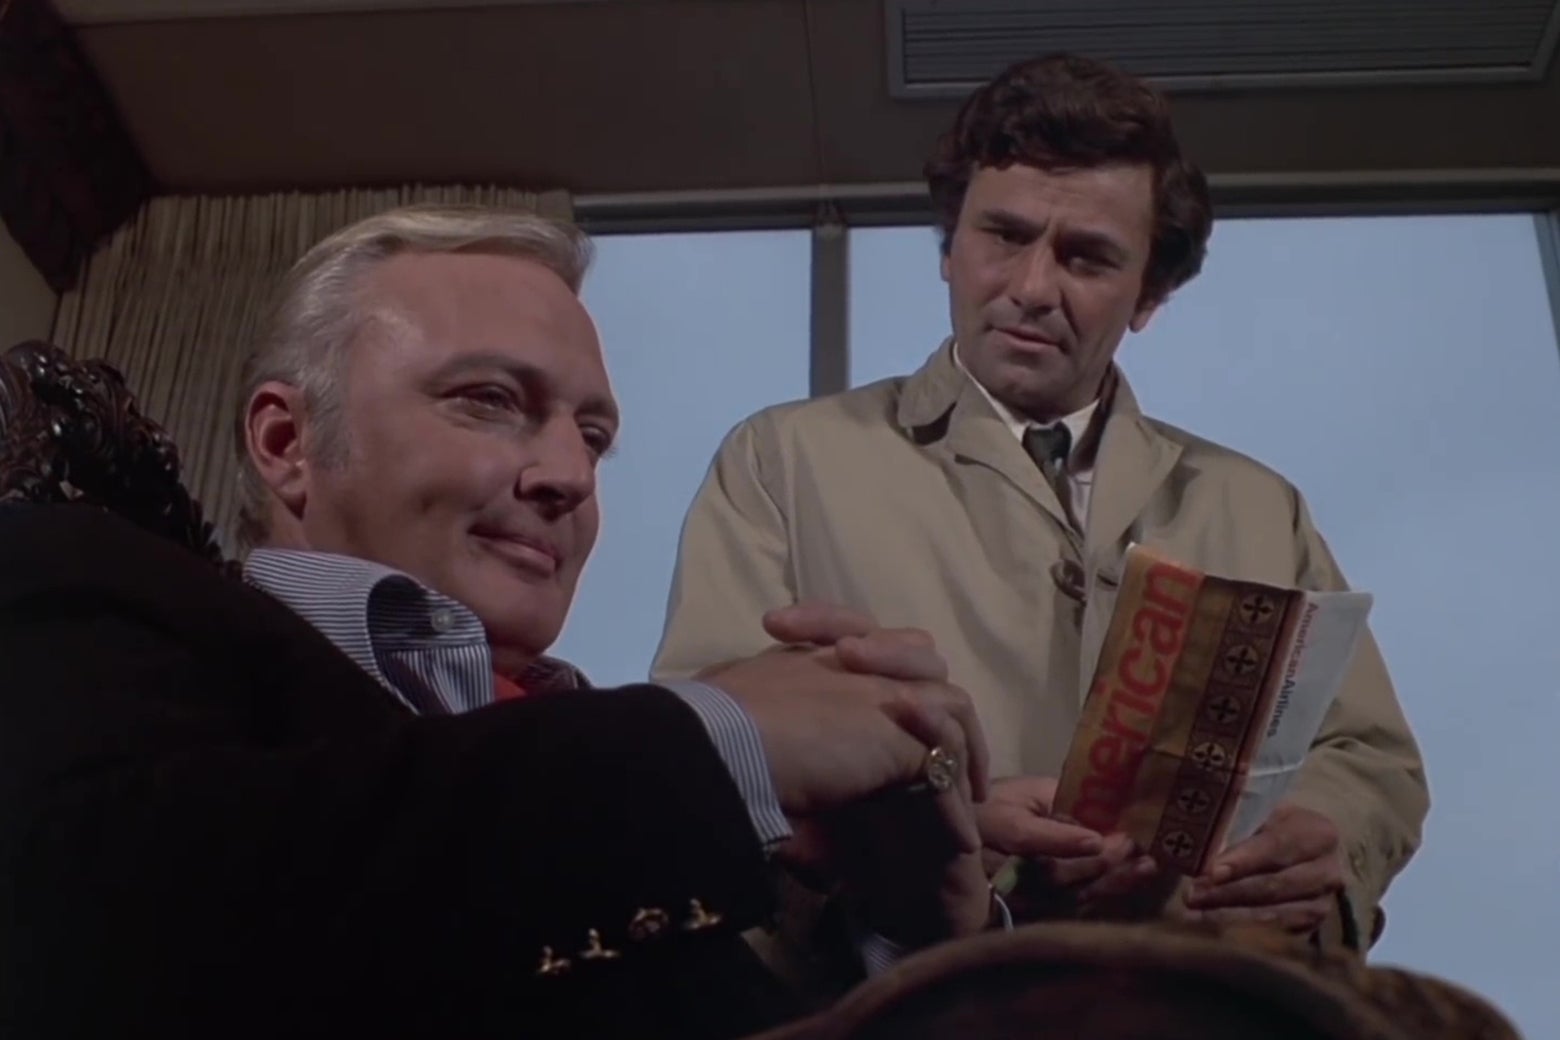 Jack Cassidy and Peter Falk in a still from the Columbo episode "Murder by the Book." Cassidy sits in the foreground, smirking; Columbo stands behind him asking a question.